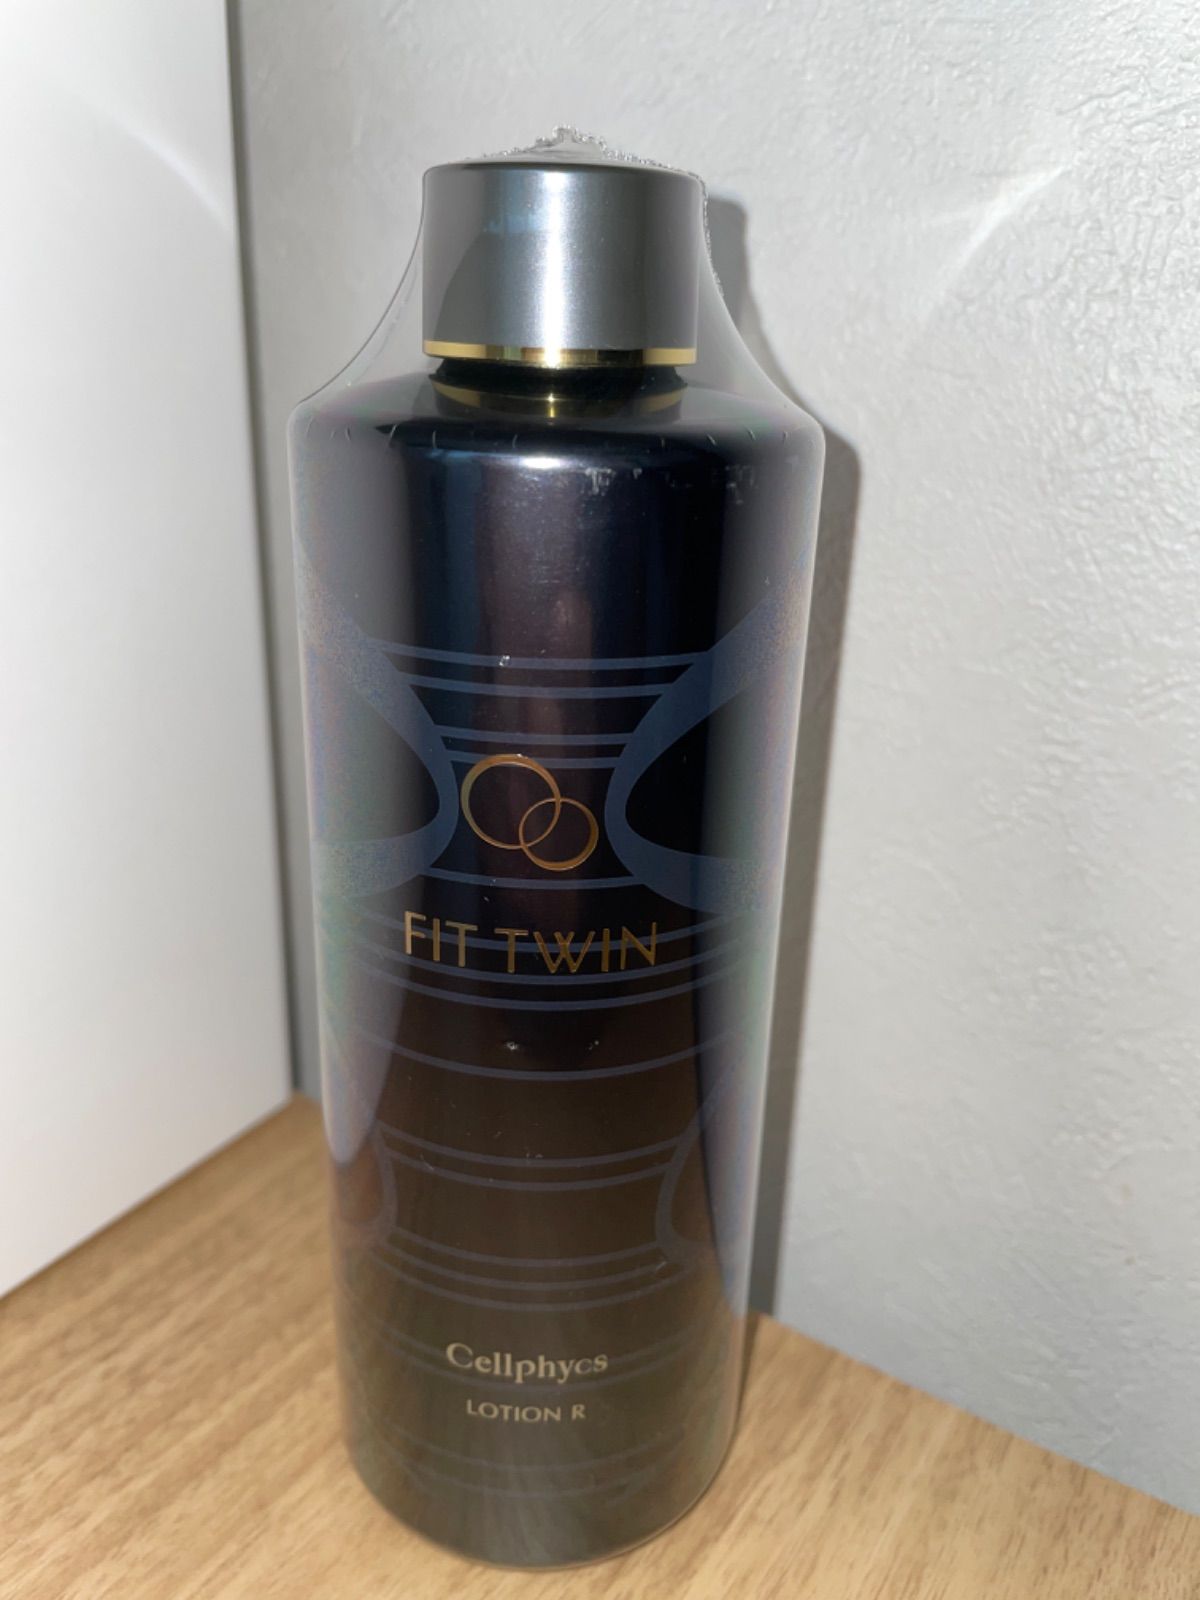 FIT TWIN Cellphycs lotion Rn